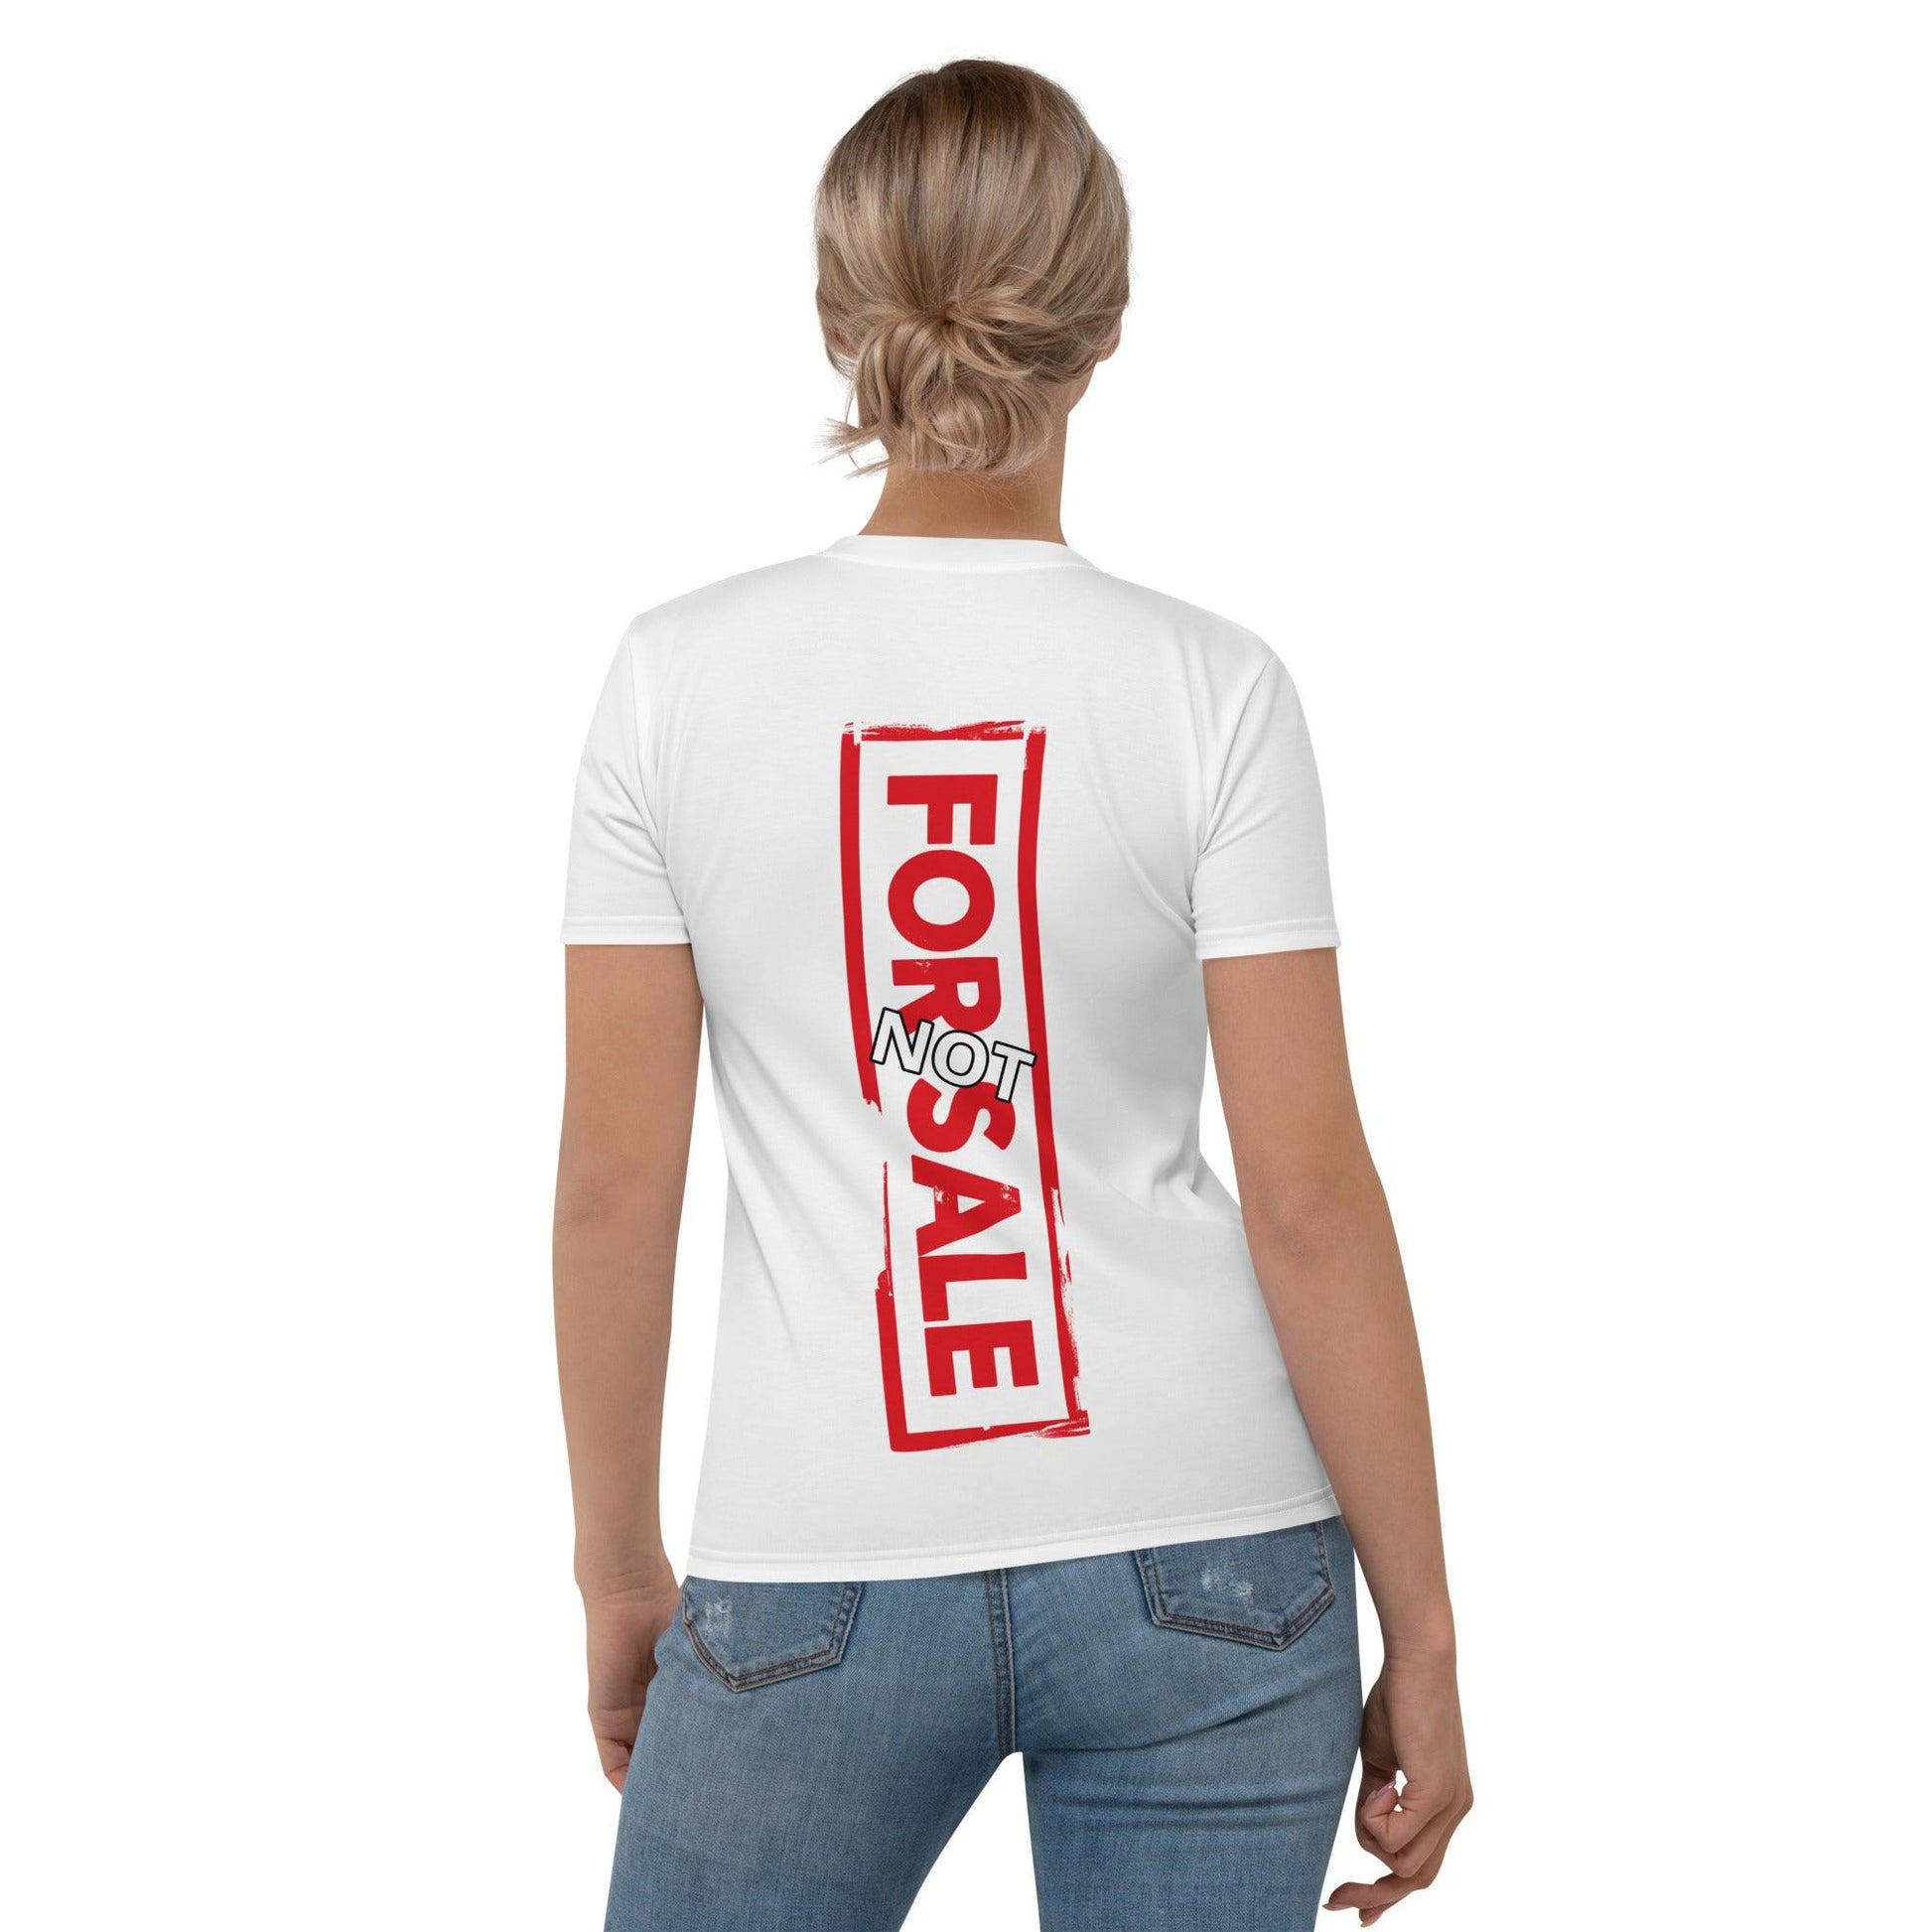 Not For Sale Red Stamp - Womens T-Shirt - iSAW Company